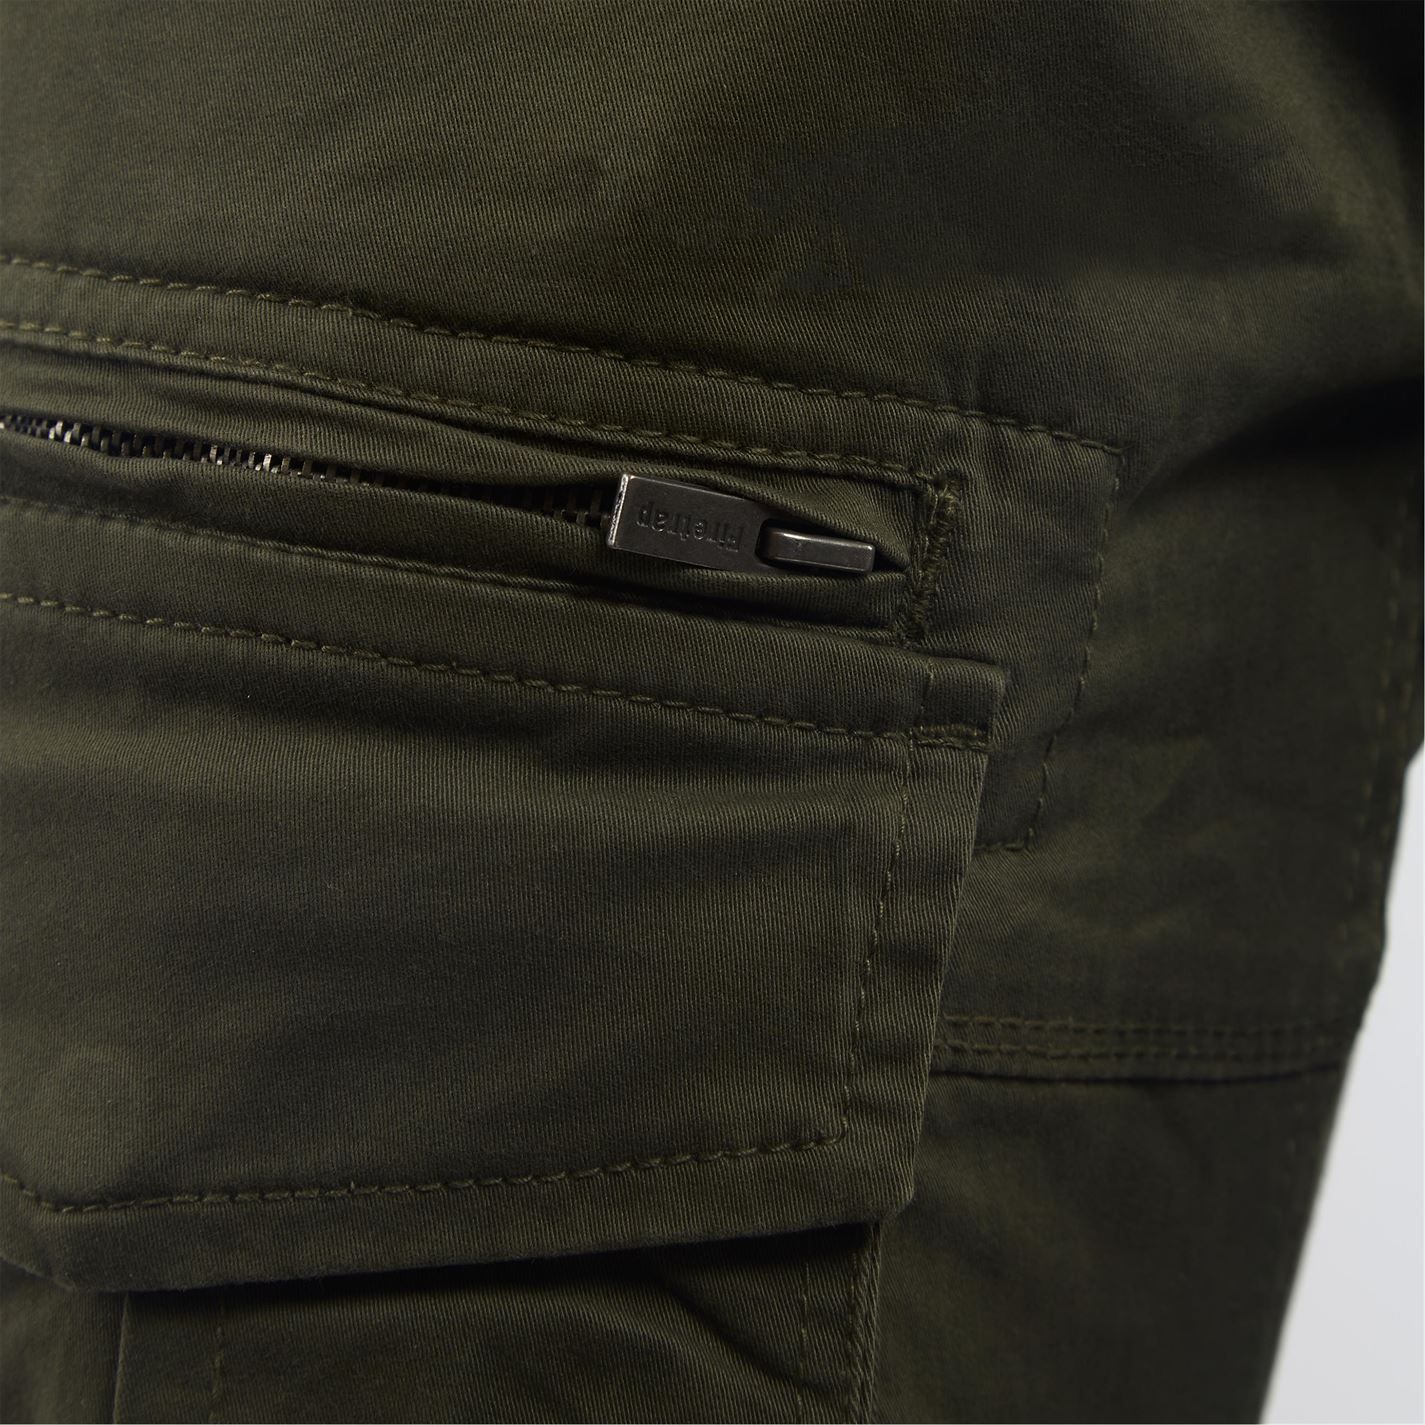 Firetrap Cargo Chinos Mens -  These Firetrap Cargo Chinos are crafted with a button fastened waist and zip fly for a classic look. They also feature belt loop holes and come fashioned in an 8 pocket style. These chinos are then crafted from a lightweight construction, designed with the signature logo for Firetrap branding.  > Chinos > Button fastening waist > Zip fly > Belt loop holes > 8 pockets > Lightweight > Drawstring adjustable hems > Signature logo > Leather branding patch to rear > Branding tab to left trouser leg pocket > Firetrap branding > 98% cotton, 2% elastane > Machine washable at 40 degrees > Keep away from fire